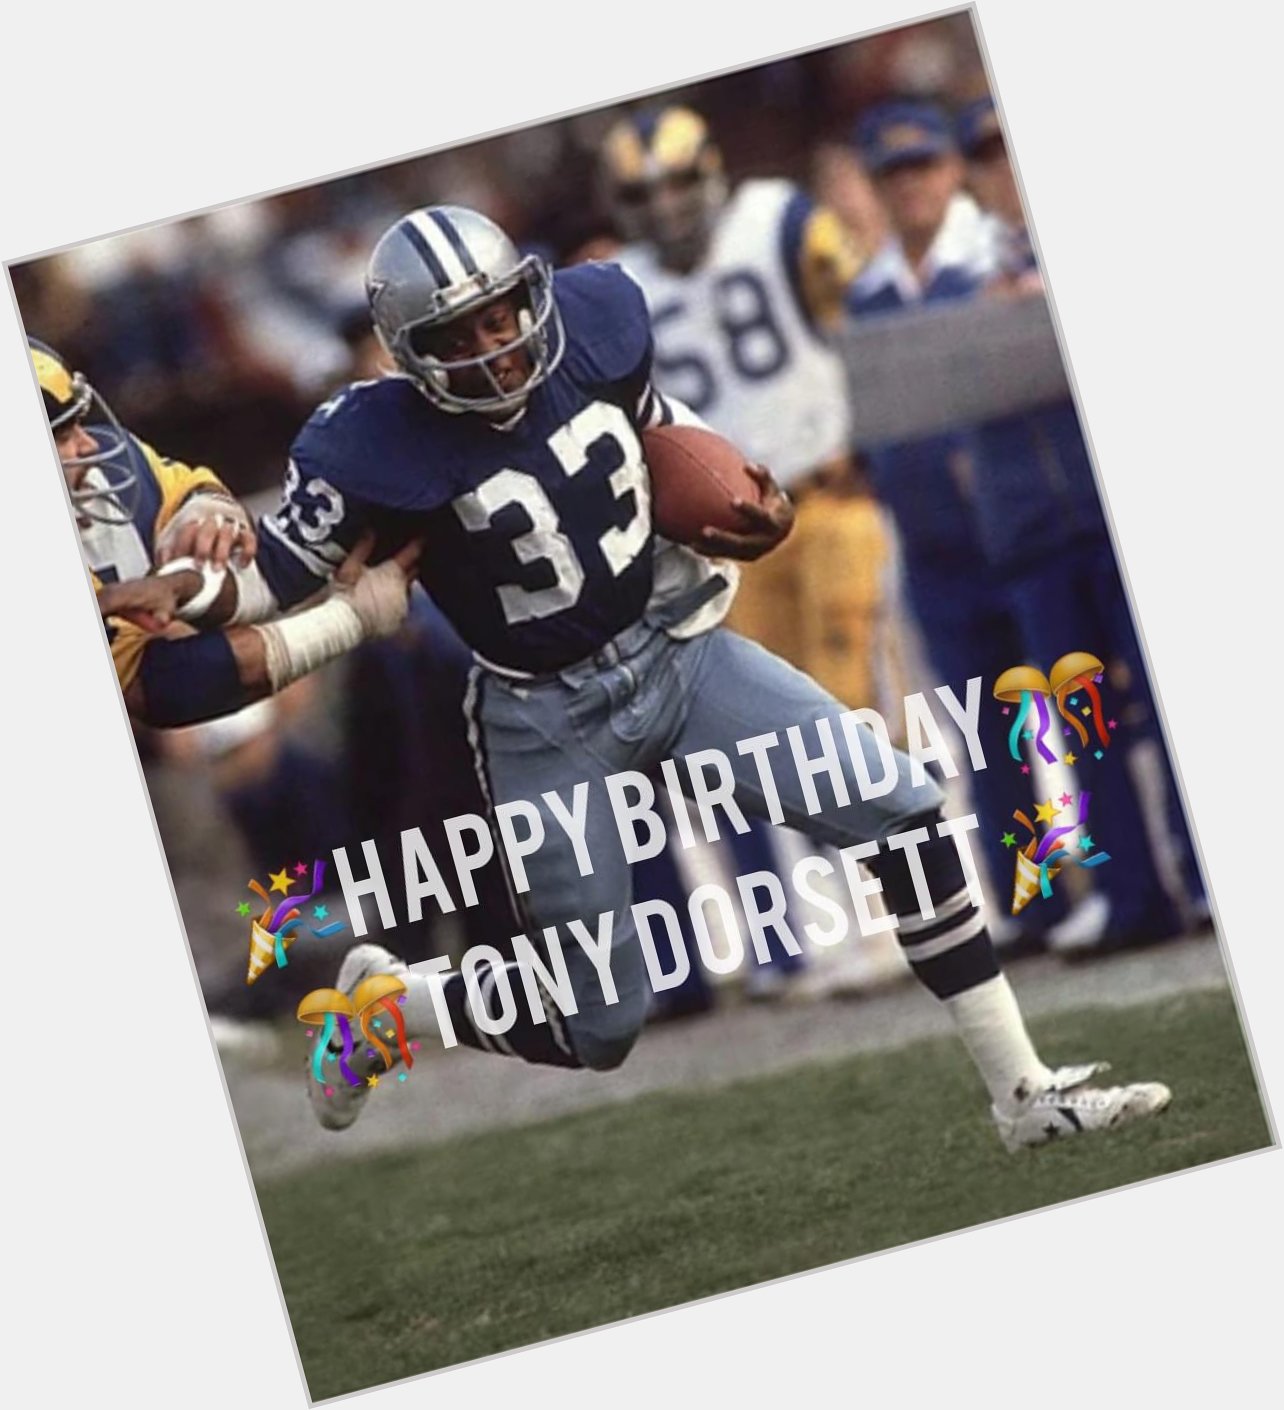  help us wish a Happy Birthday to one of the Best of all time - Tony Dorsett!  